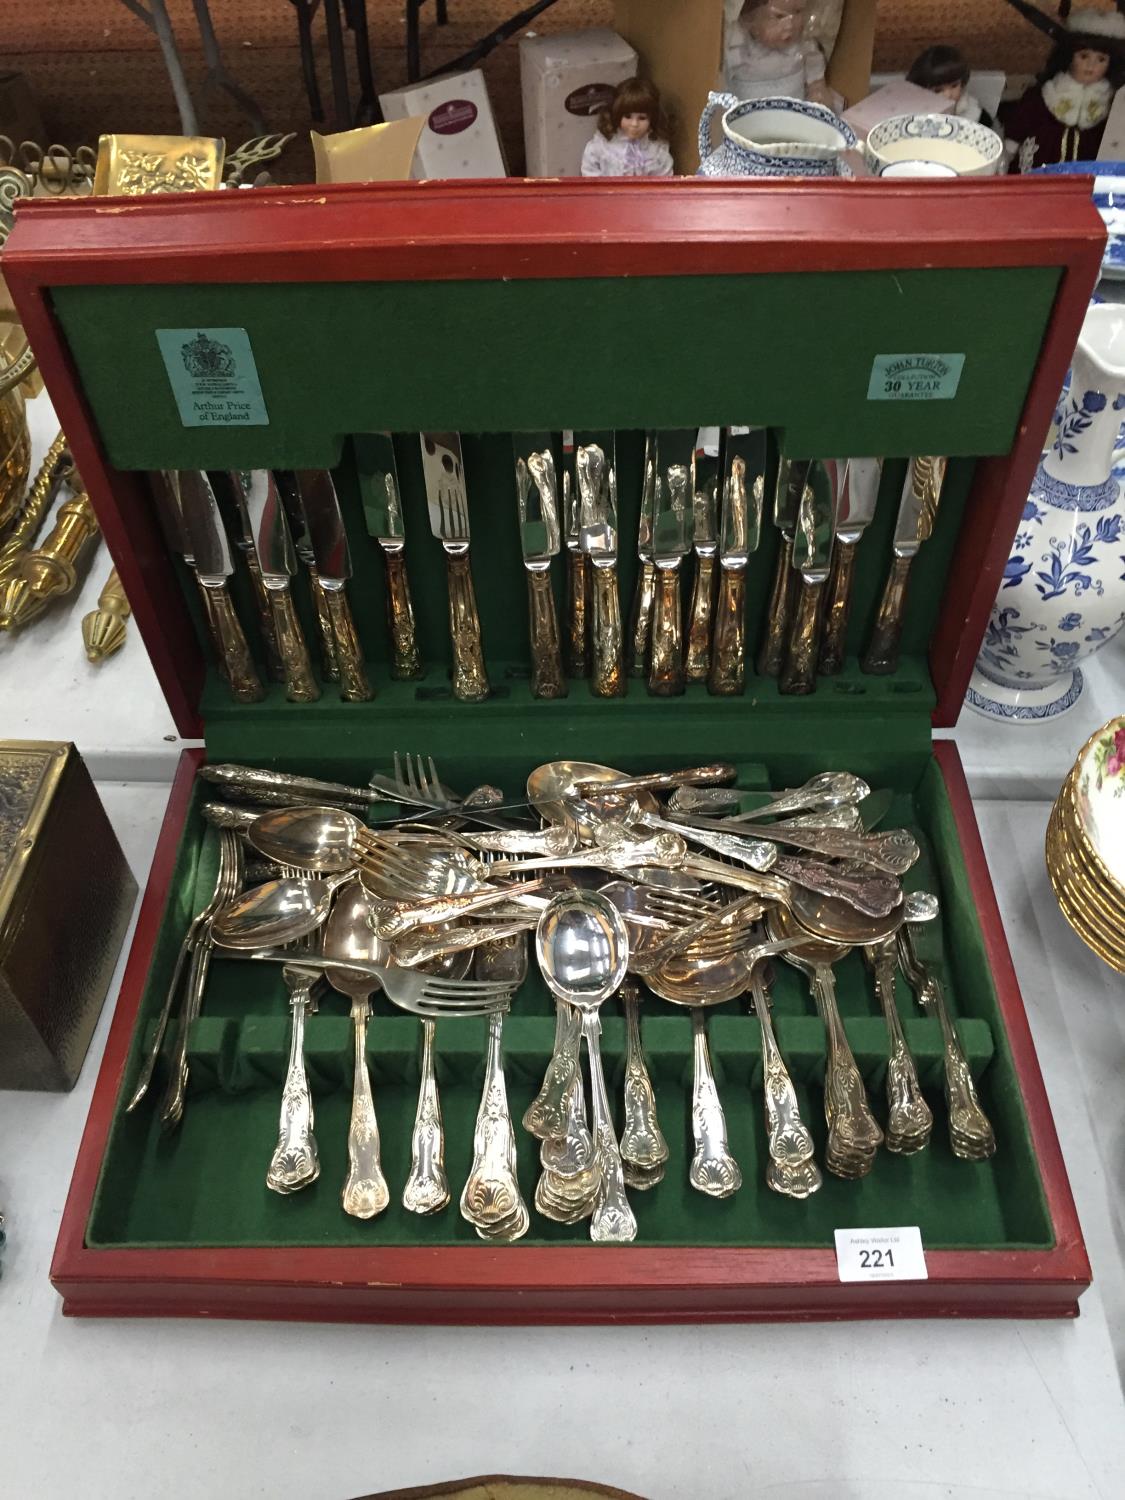 A BOXED ARTHUR PRICE OF ENGLAND BY APPOINTMENT TO HM QUEEN ELIZABETH II CUTLERY SET (SHEFFIELD)